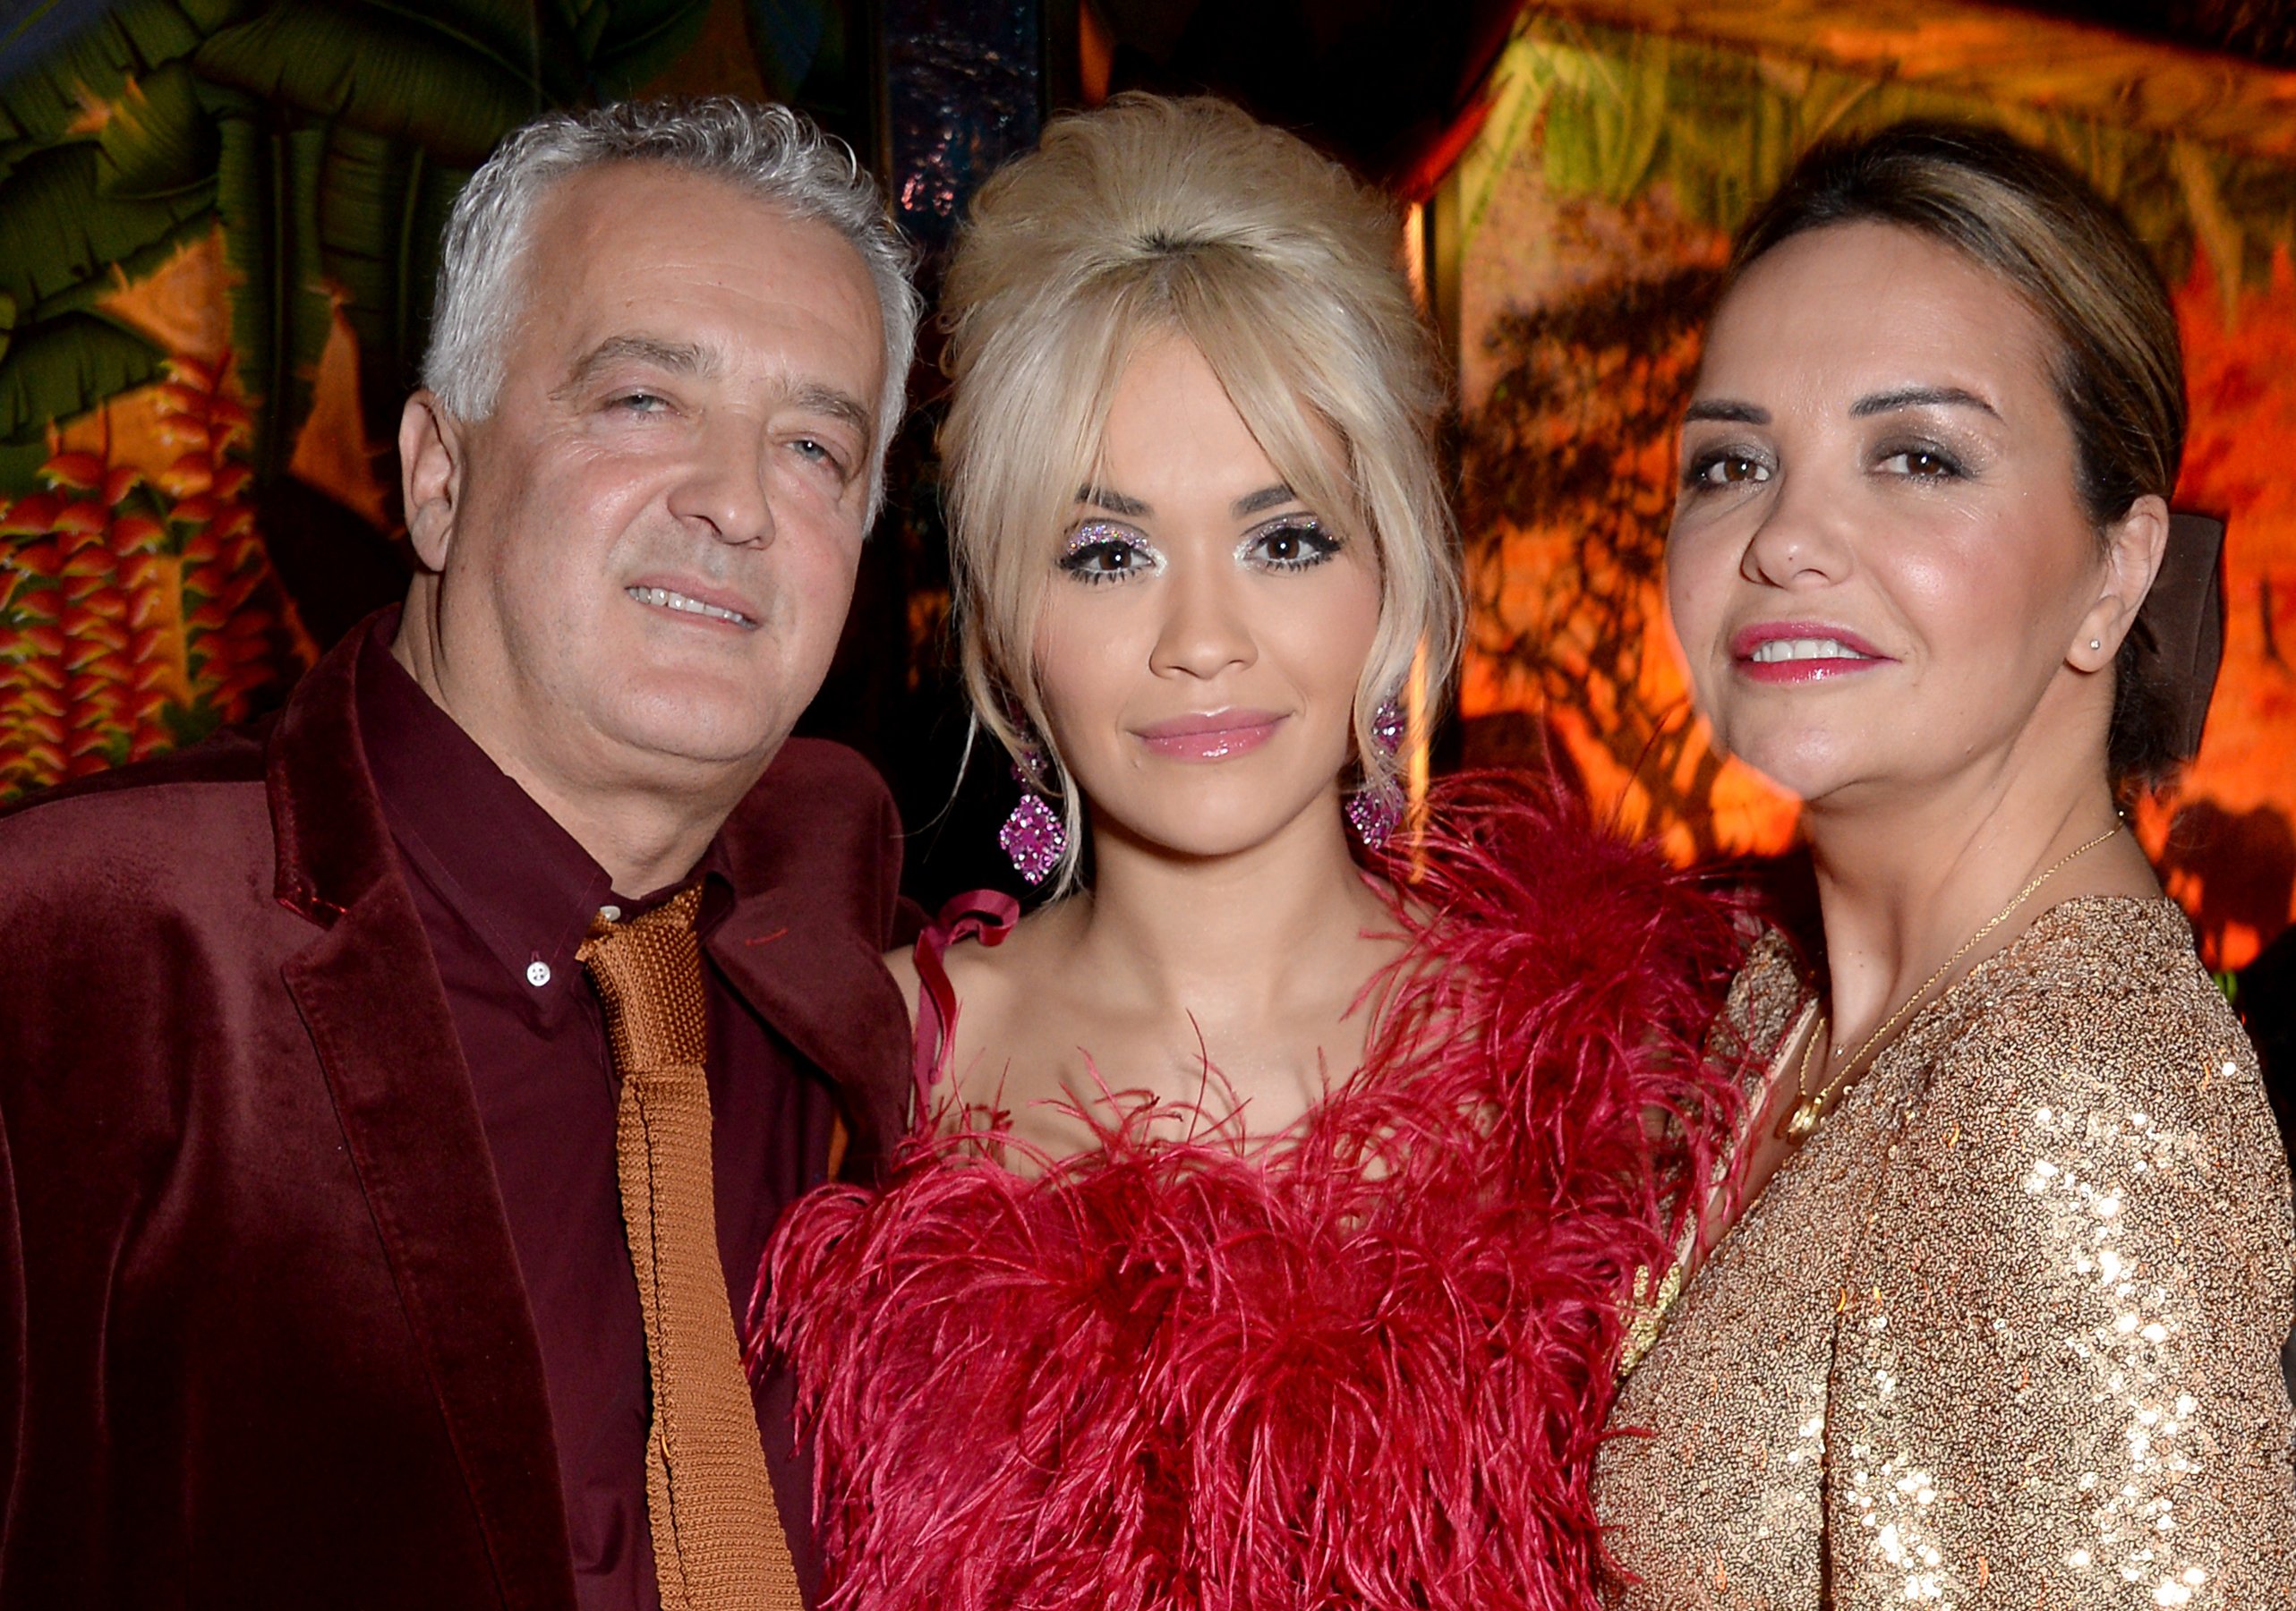 Besnik, Rita, and Vera Ora at the "Phoenix" album launch party on November 19, 2018, in London | Source: Getty Images